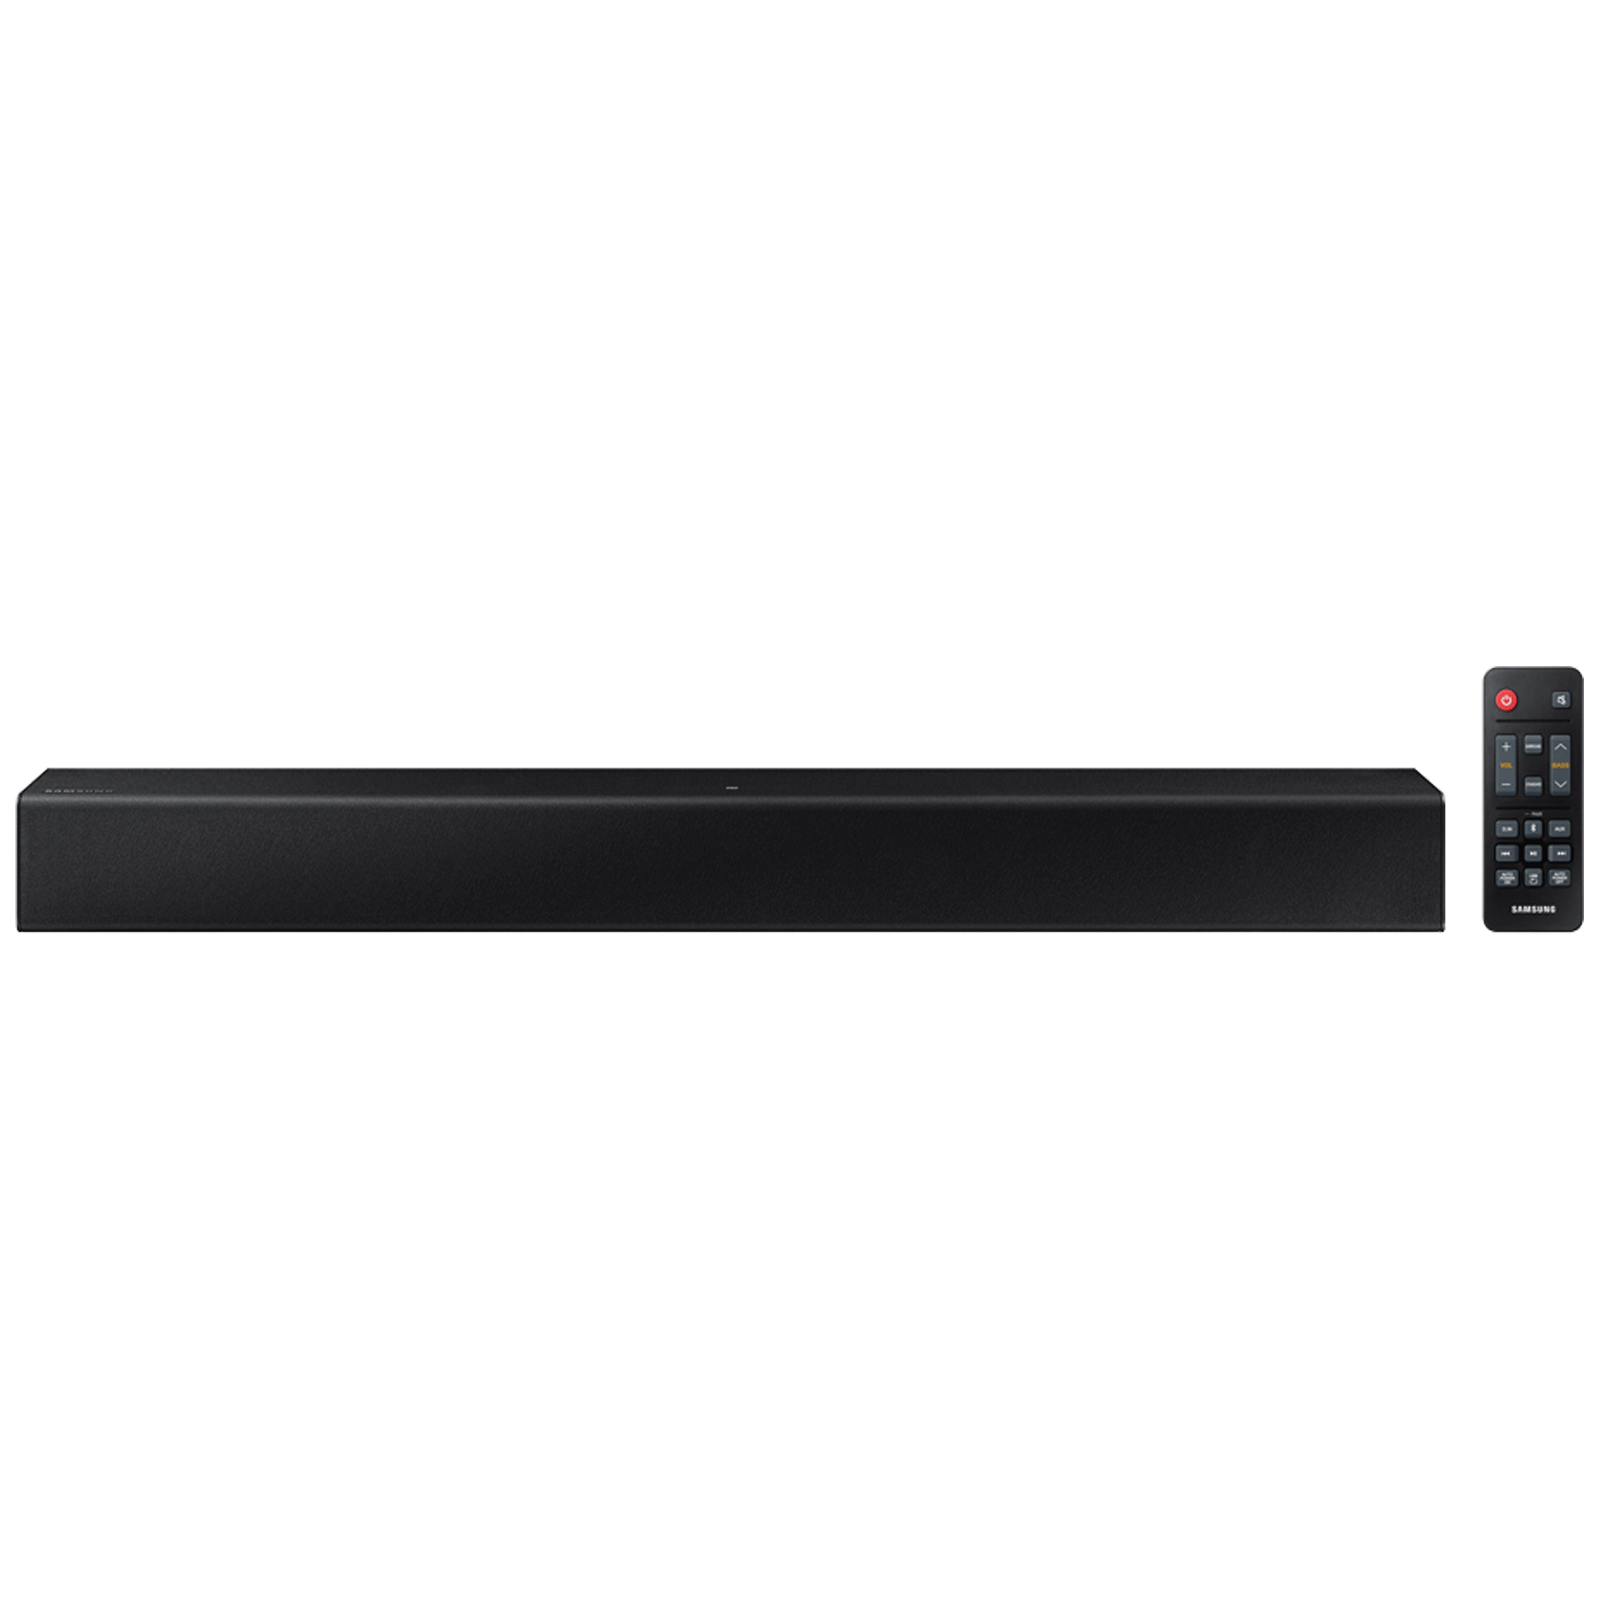 [For ICICI Card] Samsung 2.0 Channel 40 Watts Dolby Sound Bar (Built-in Woofers, HW-T400/XL, Black)  